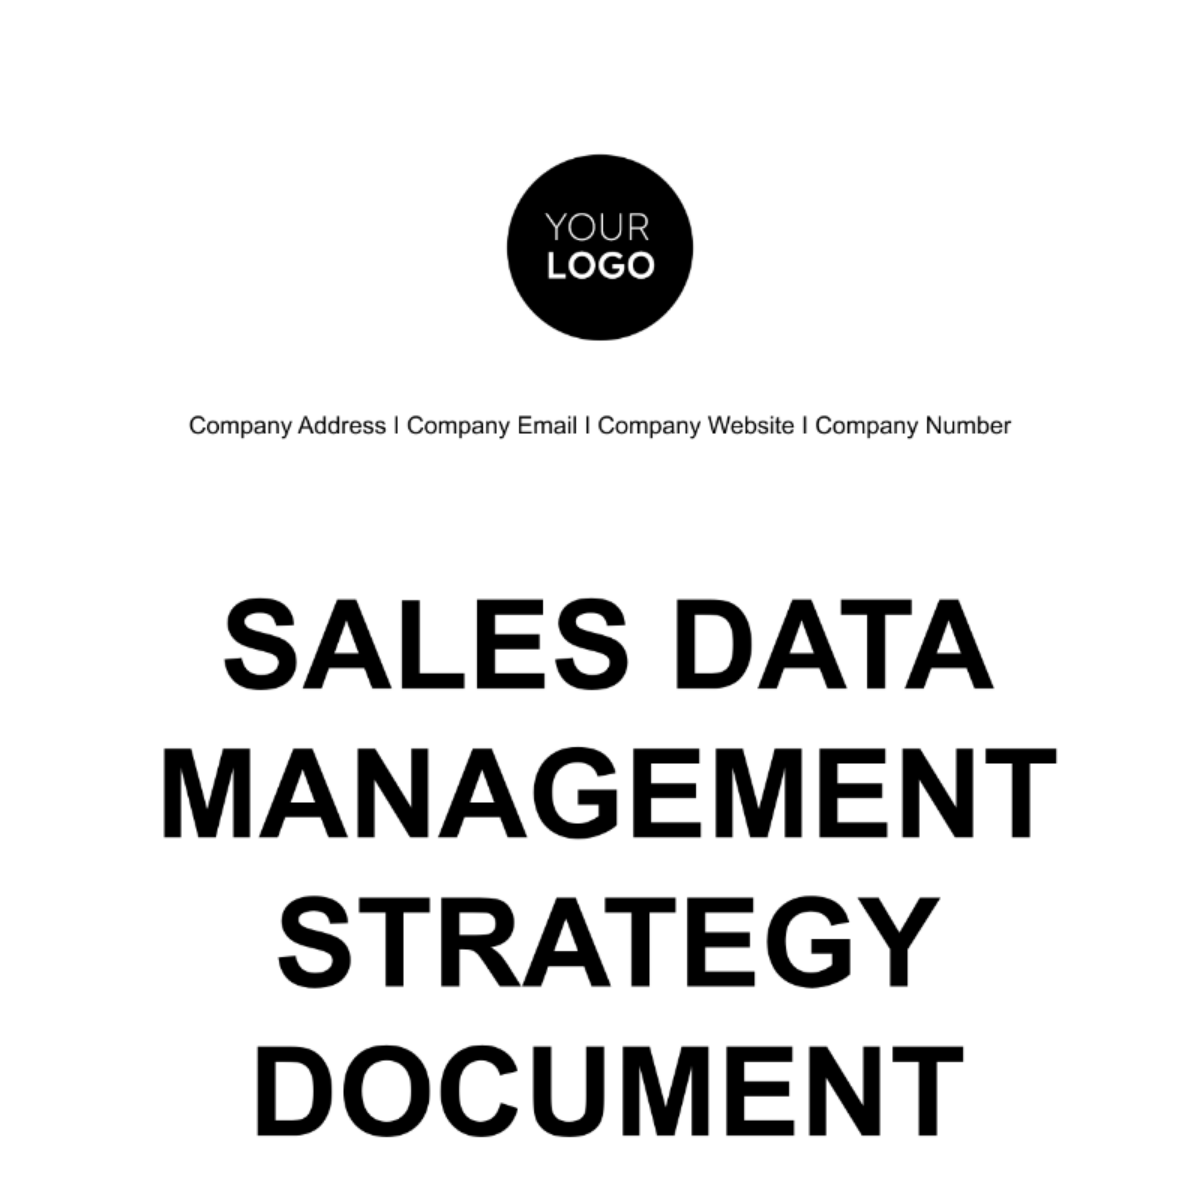 Sales Data Management Strategy Document Template